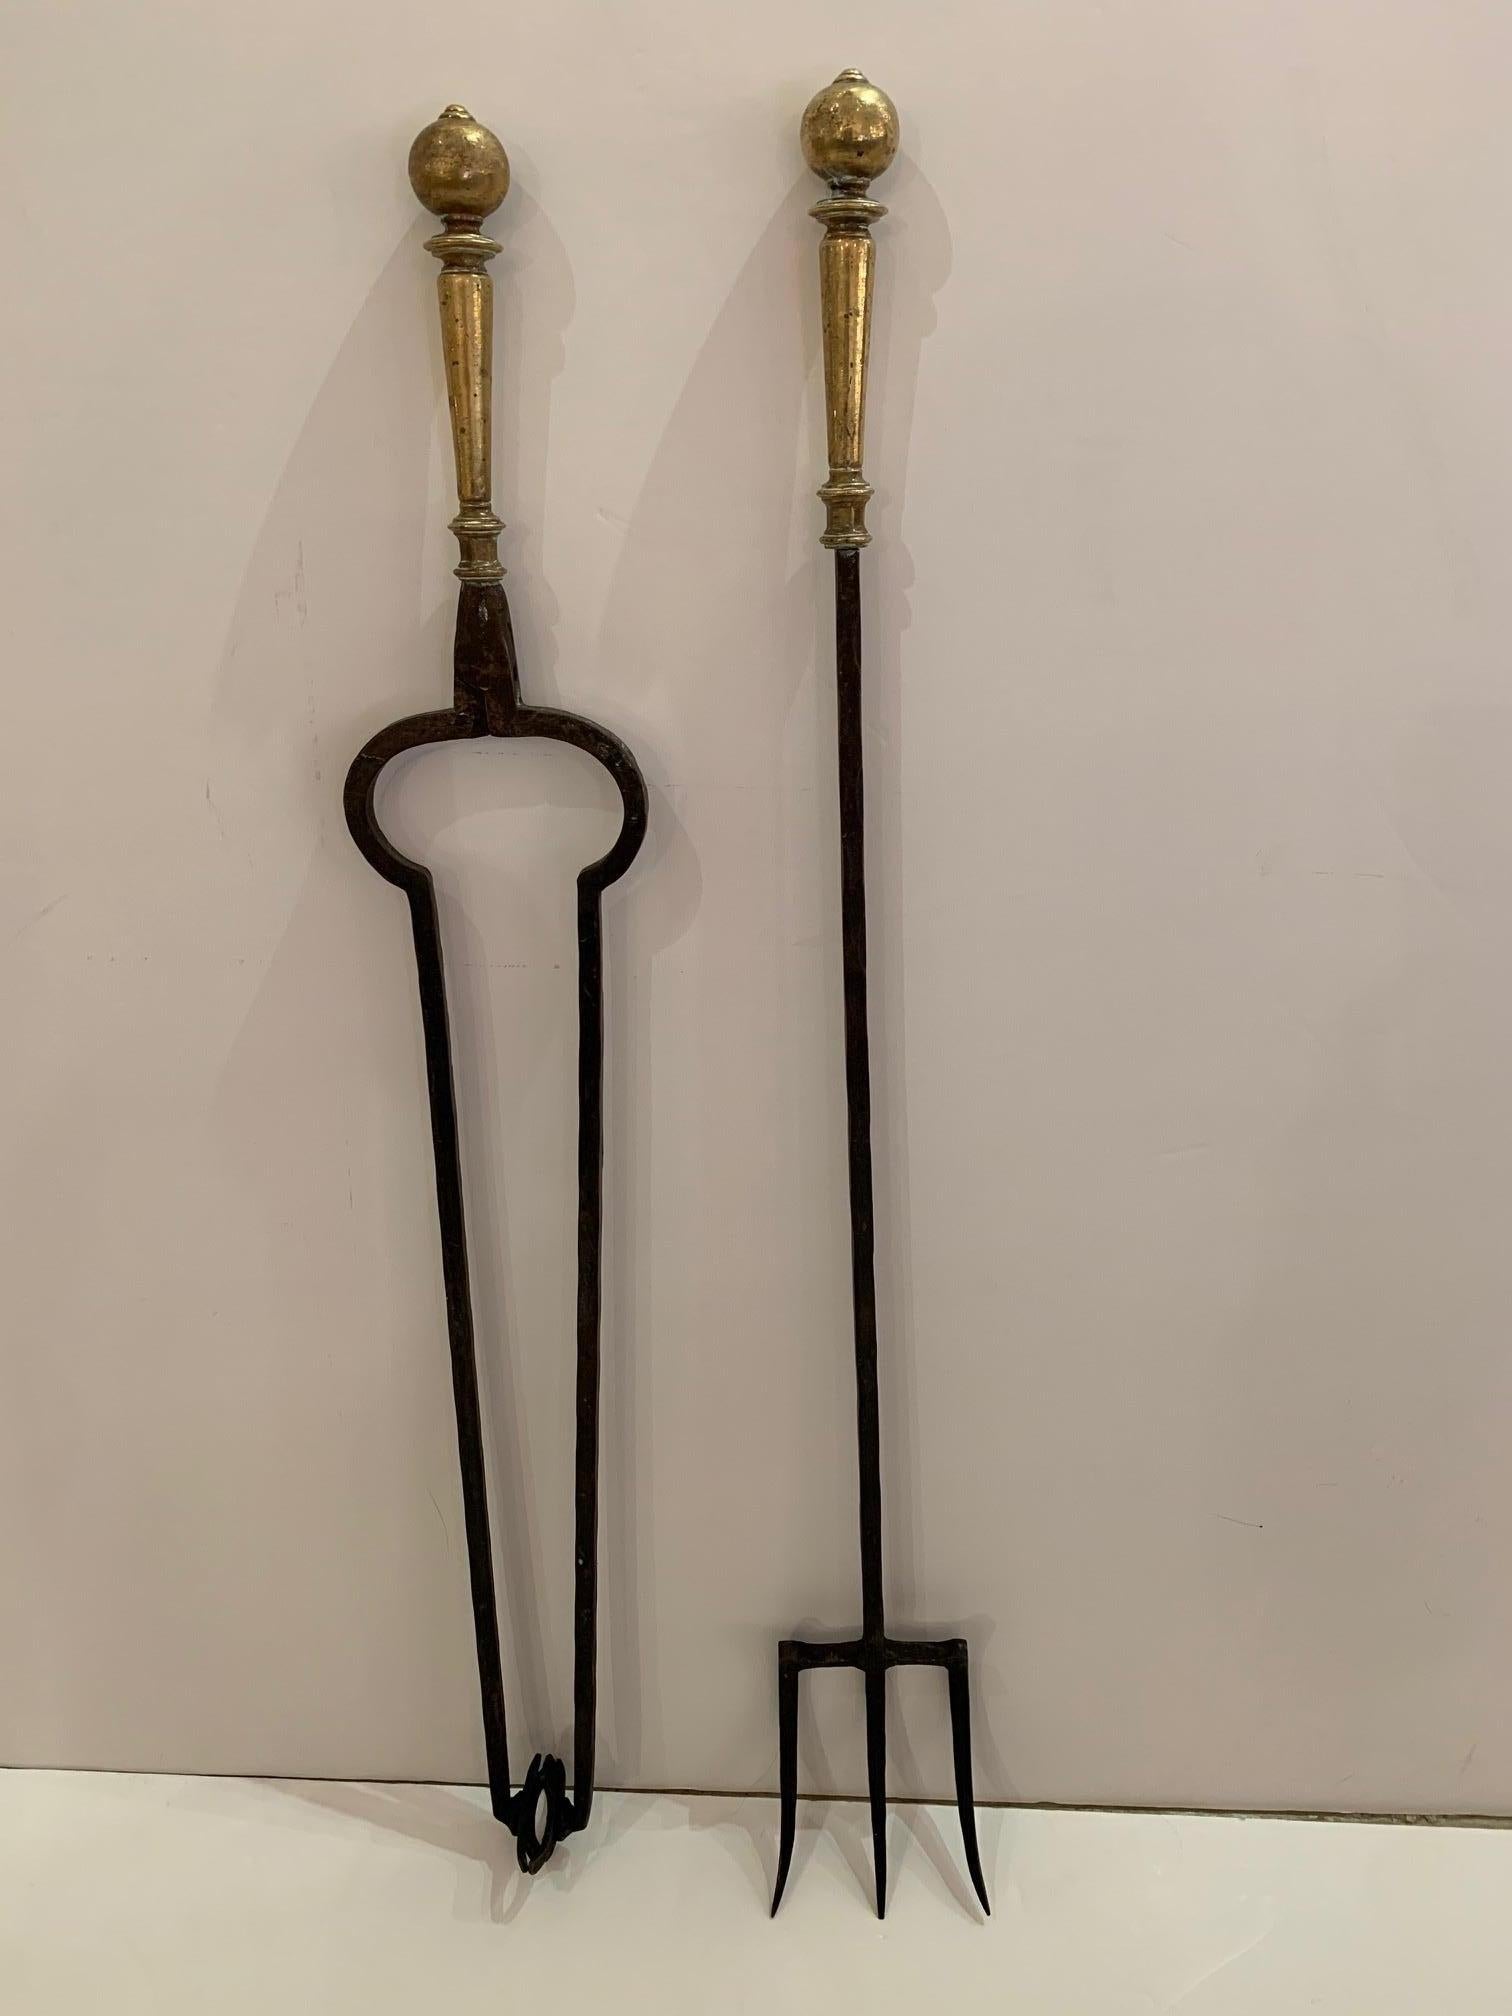 American Trio of Hand Forged Iron and Brass Antique Fireplace Tools